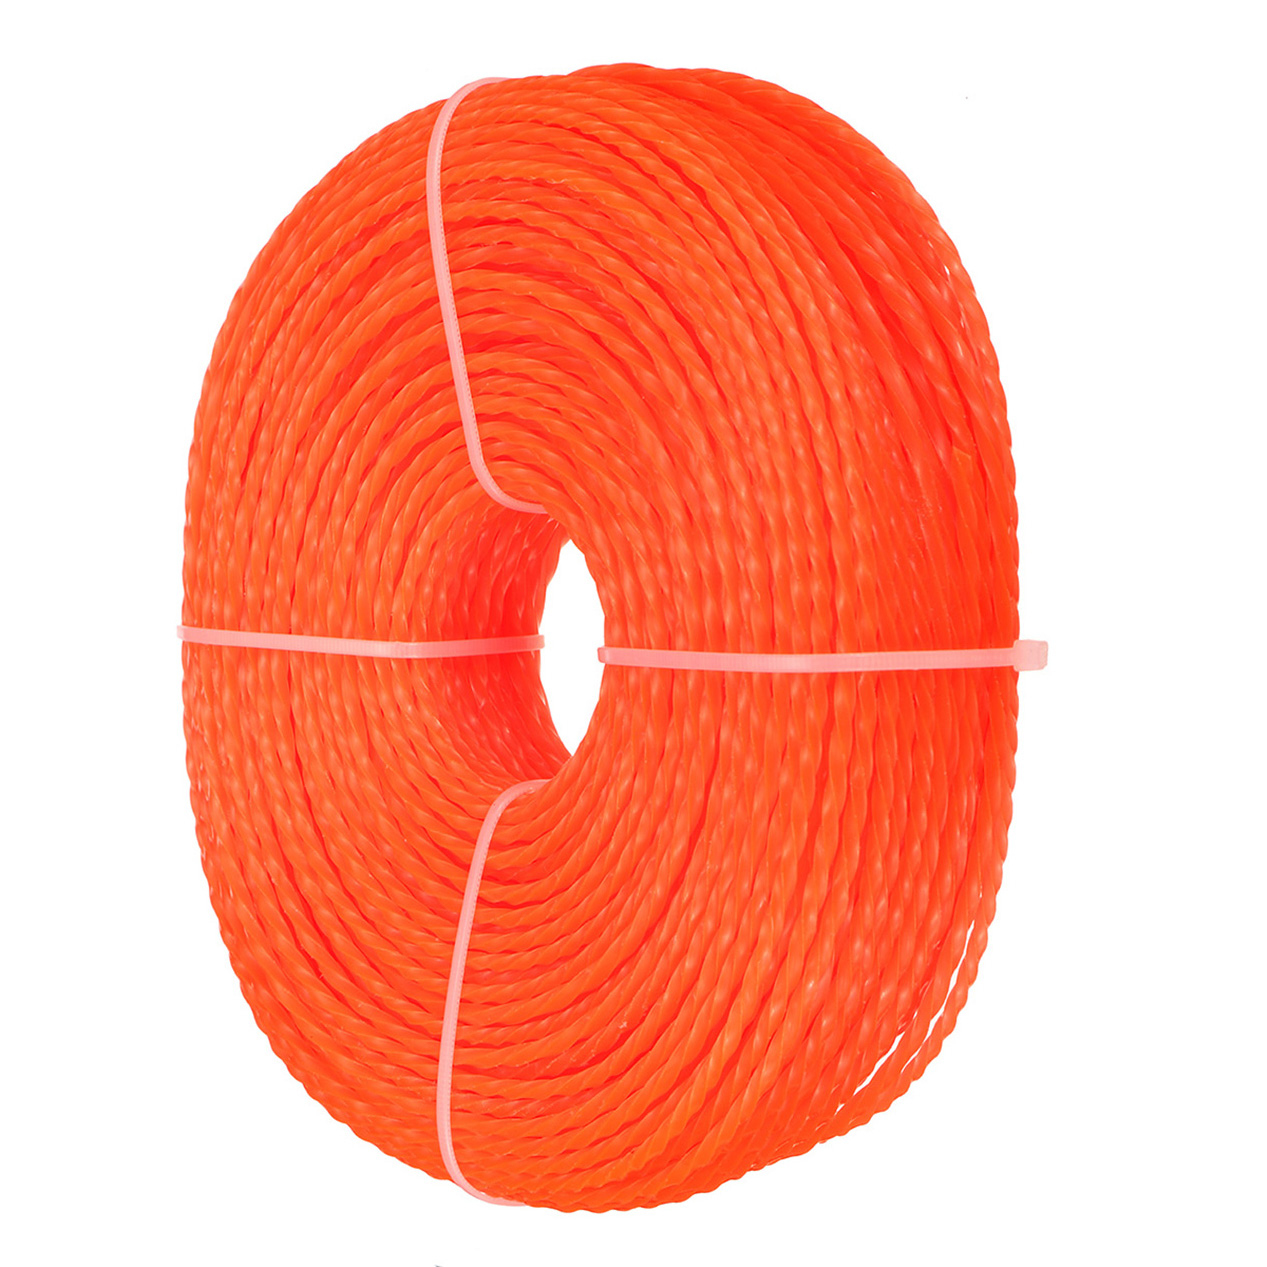 242730-mm-Commercial-Spiral-Twist-Trimmer-Line-Whipper-Snipper-Cord-1790010-5